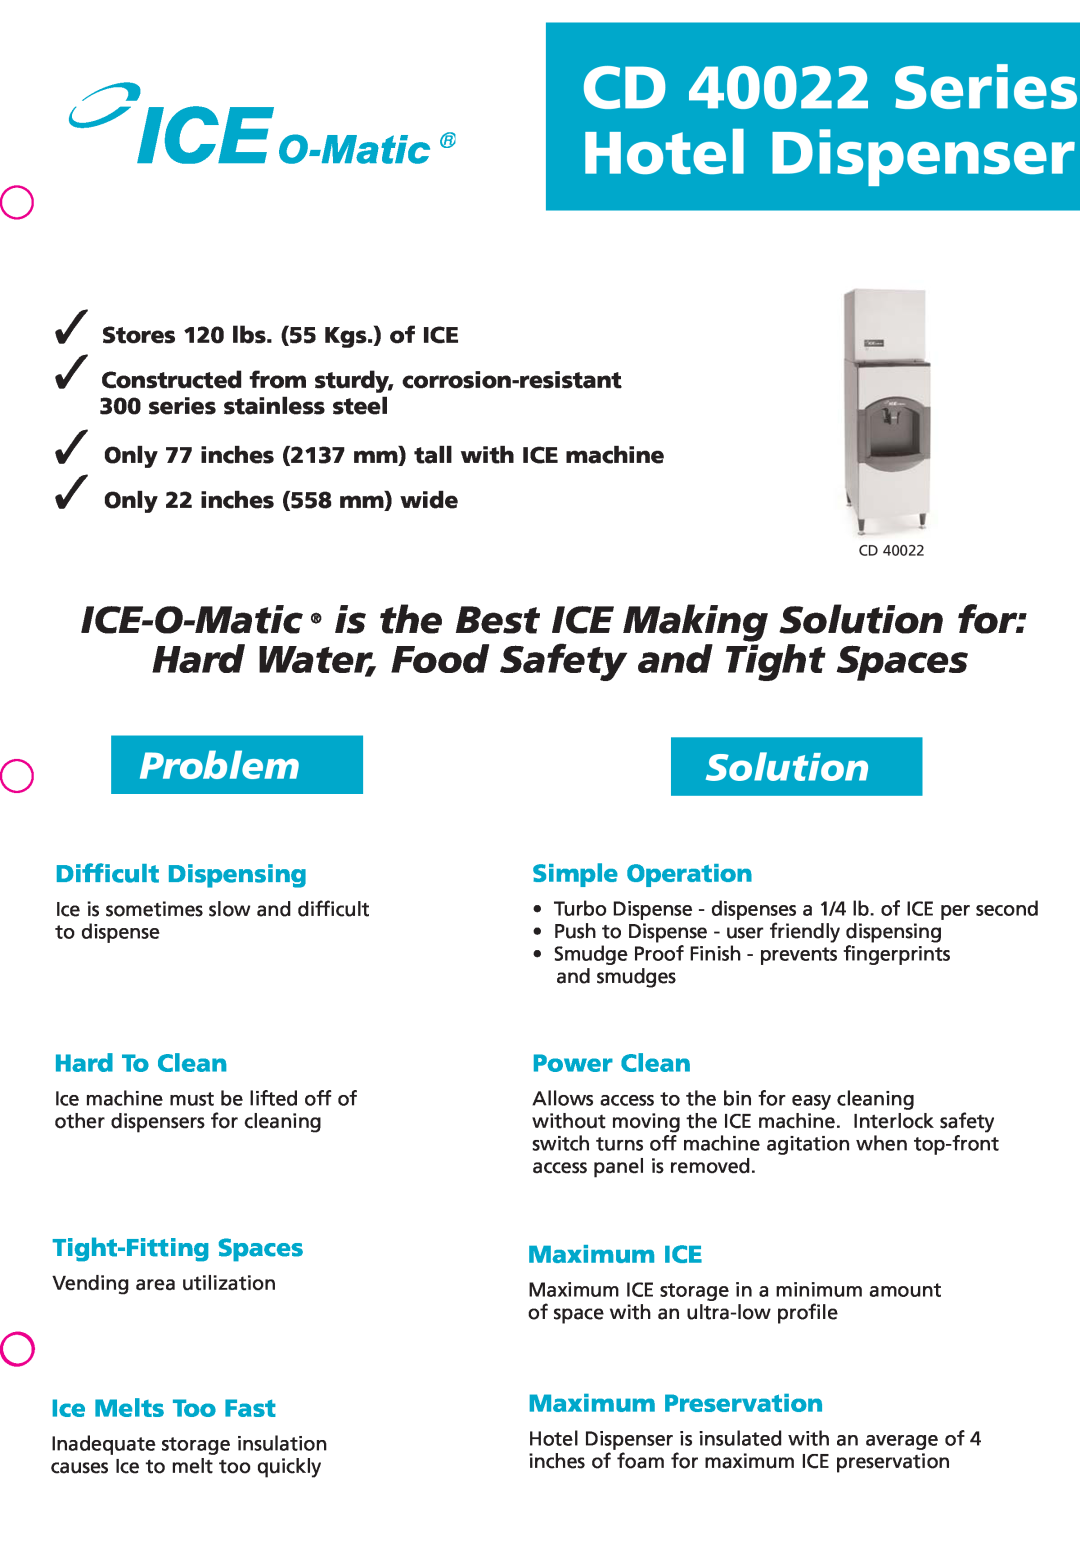 Ice-O-Matic manual CD 40022 Series, Hotel Dispenser, Problem, Solution, Difficult Dispensing, Simple Operation 